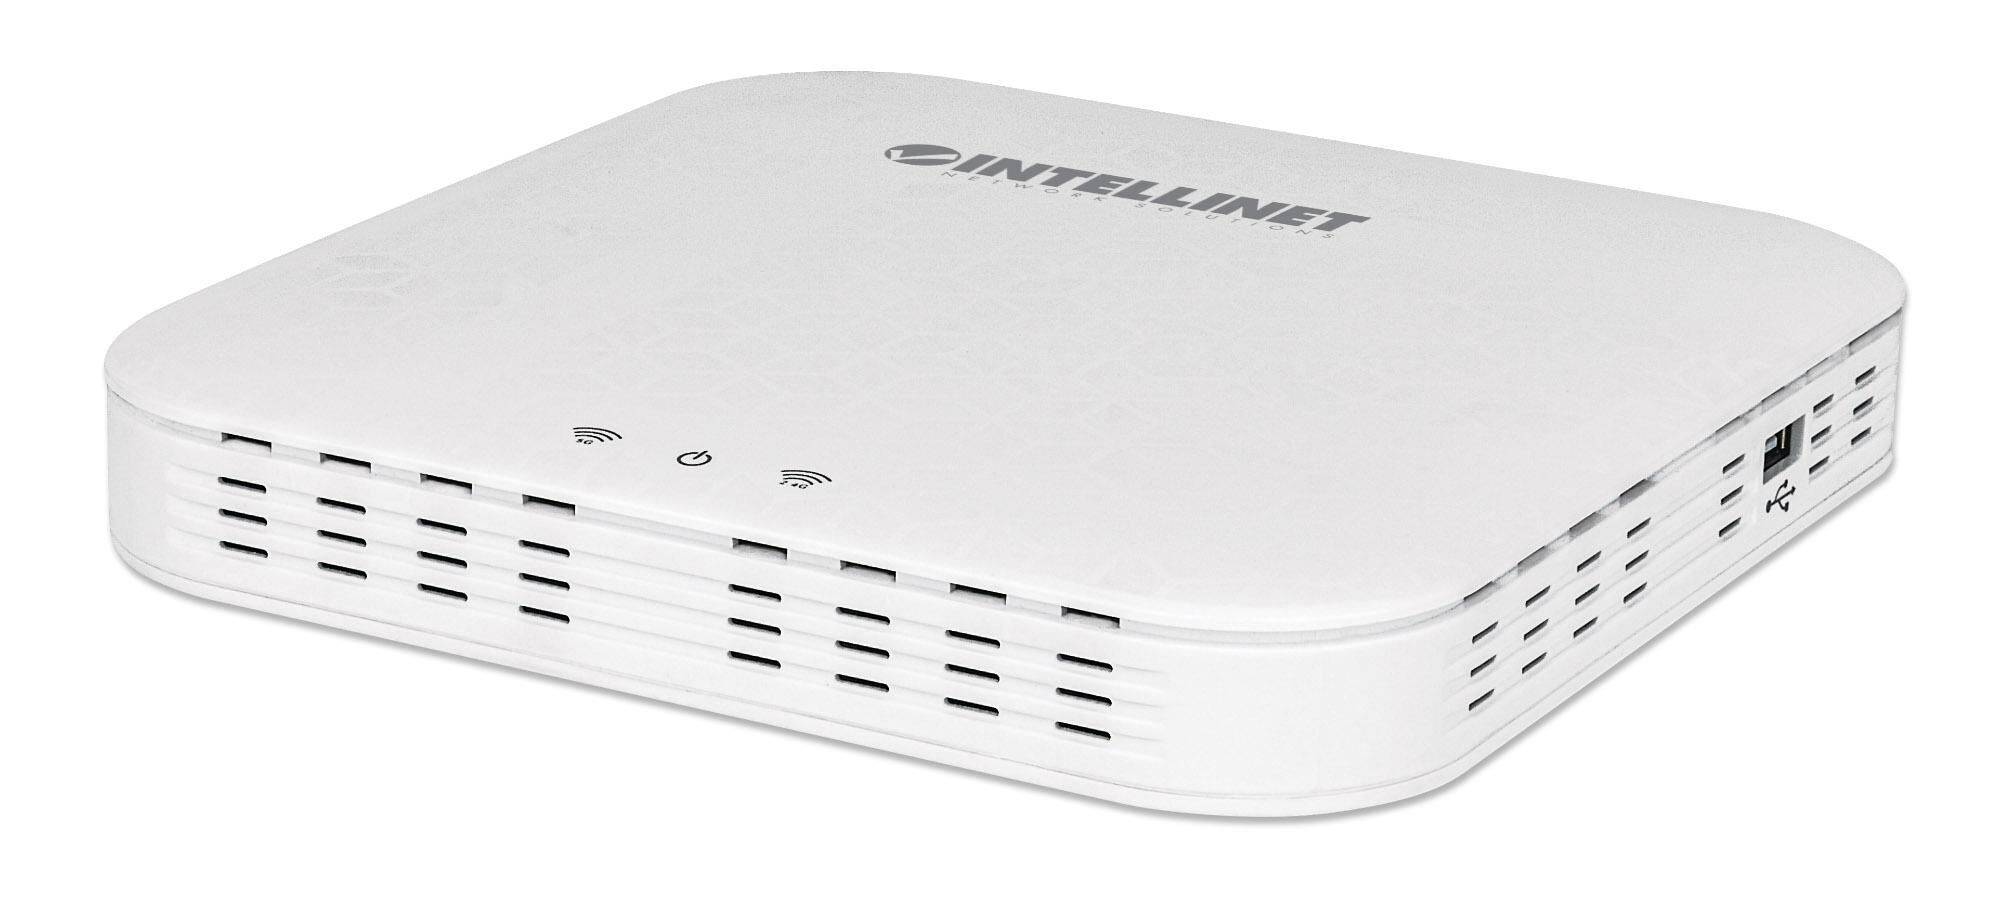 Intellinet Manageable Wireless Access Point / Router PoE Gigabit...